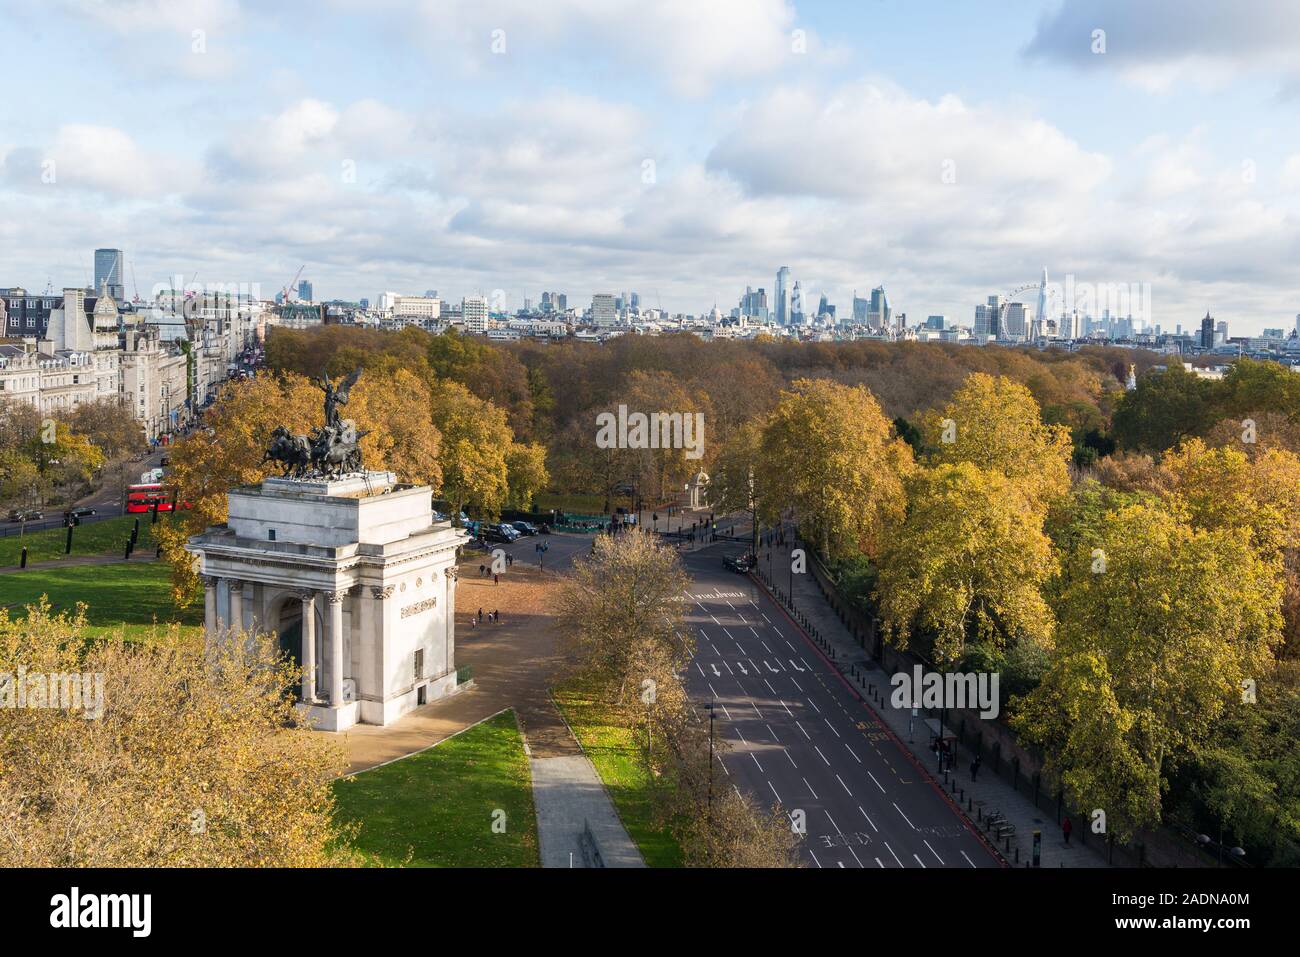 Wellington Arch, a triumphal arch built to commemorate Britain's victories in the Napoleonic Wars, stands at Hyde Park Corner in London, England, UK Stock Photo